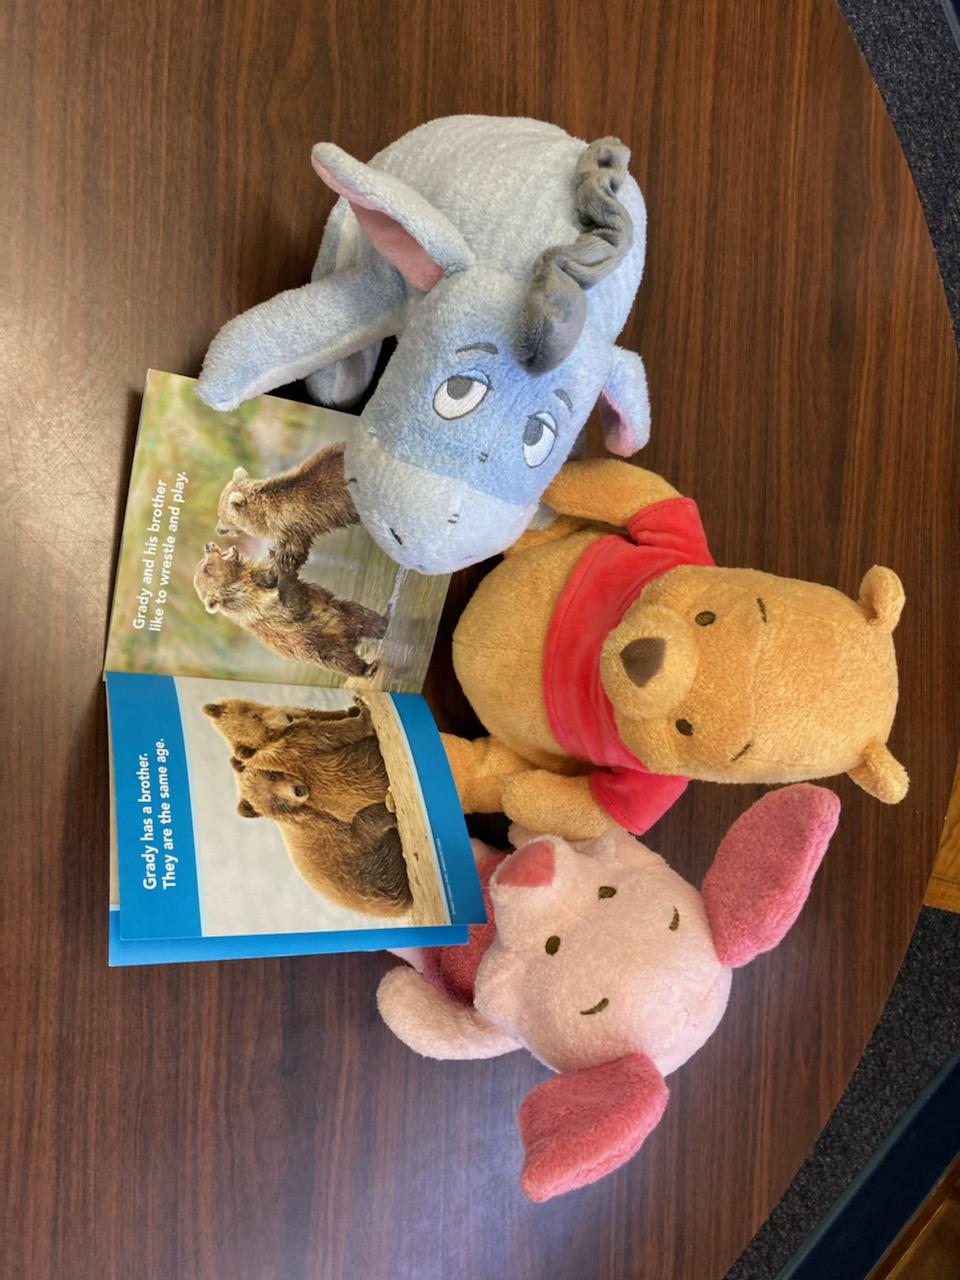 Pooh and Piglet and Eeyore reading about bear cubs